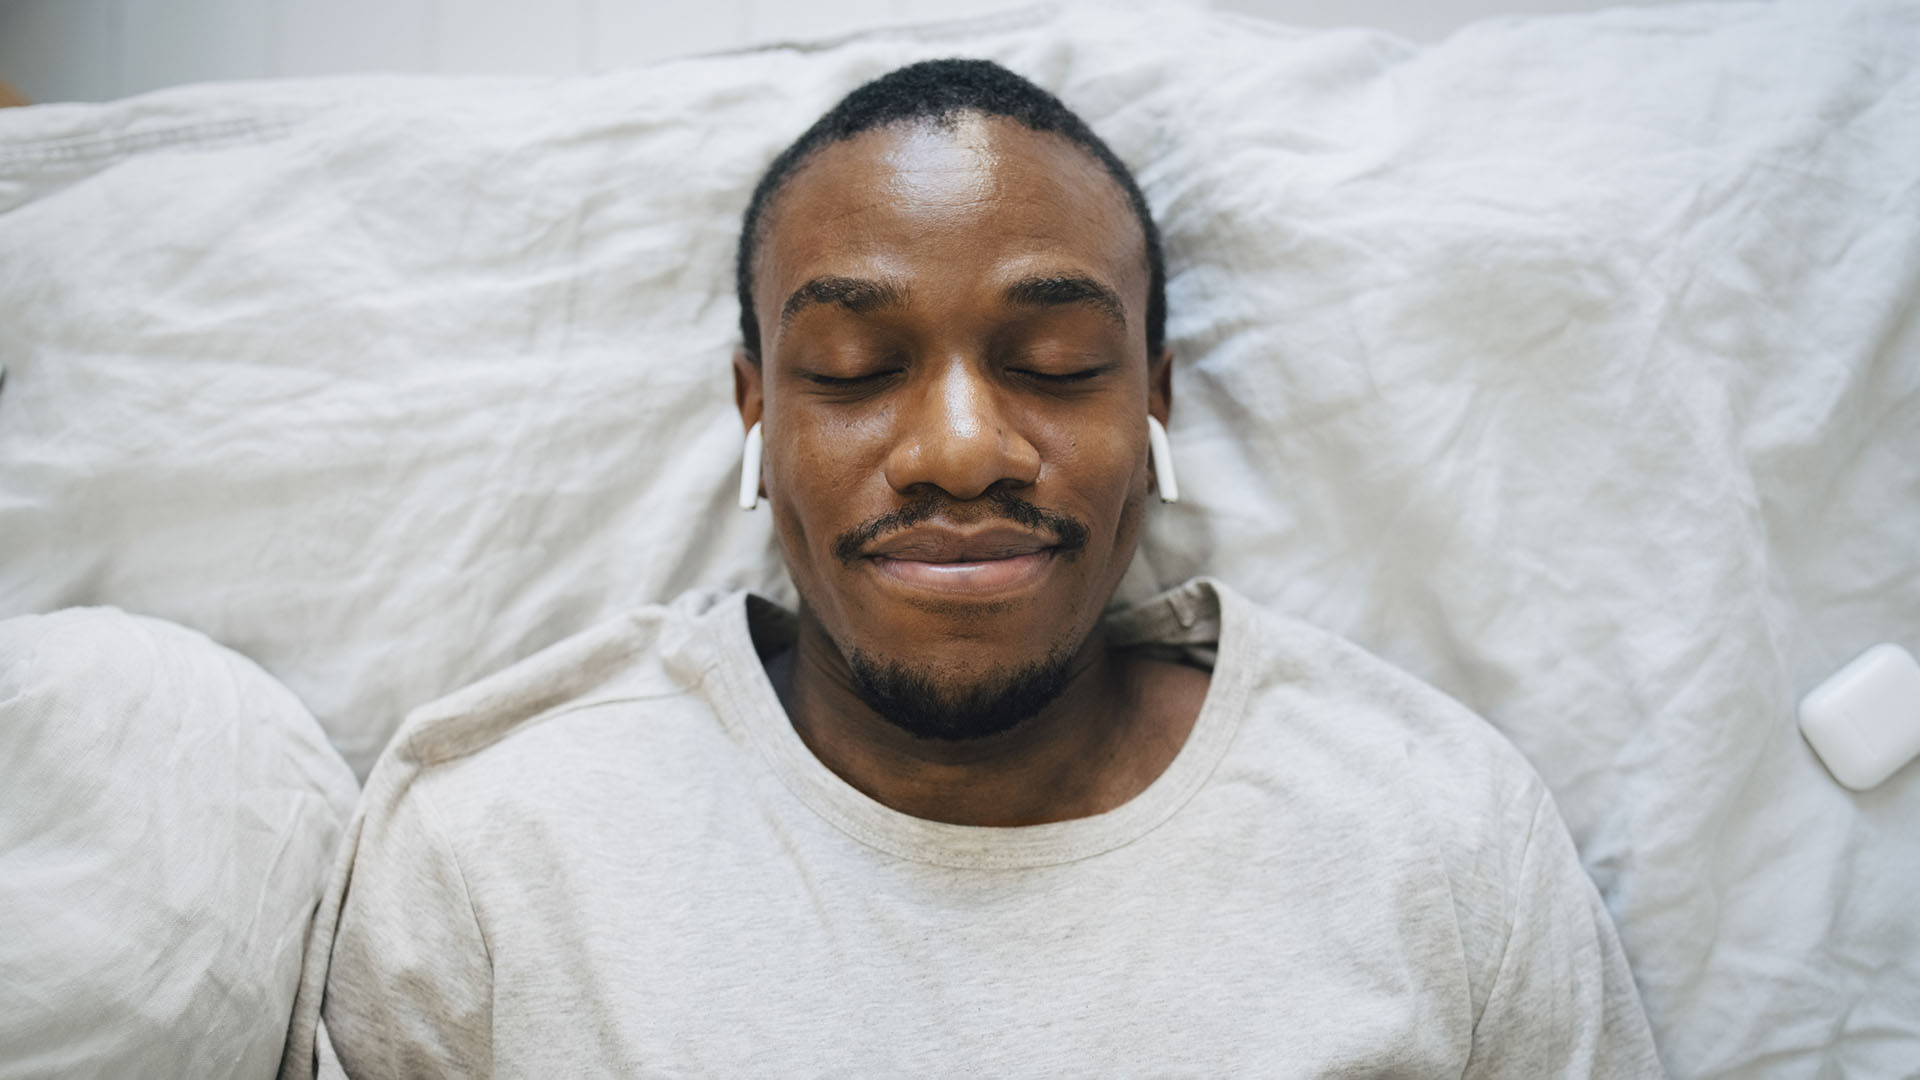 Man lying in bed with eyes closed and Airpods in